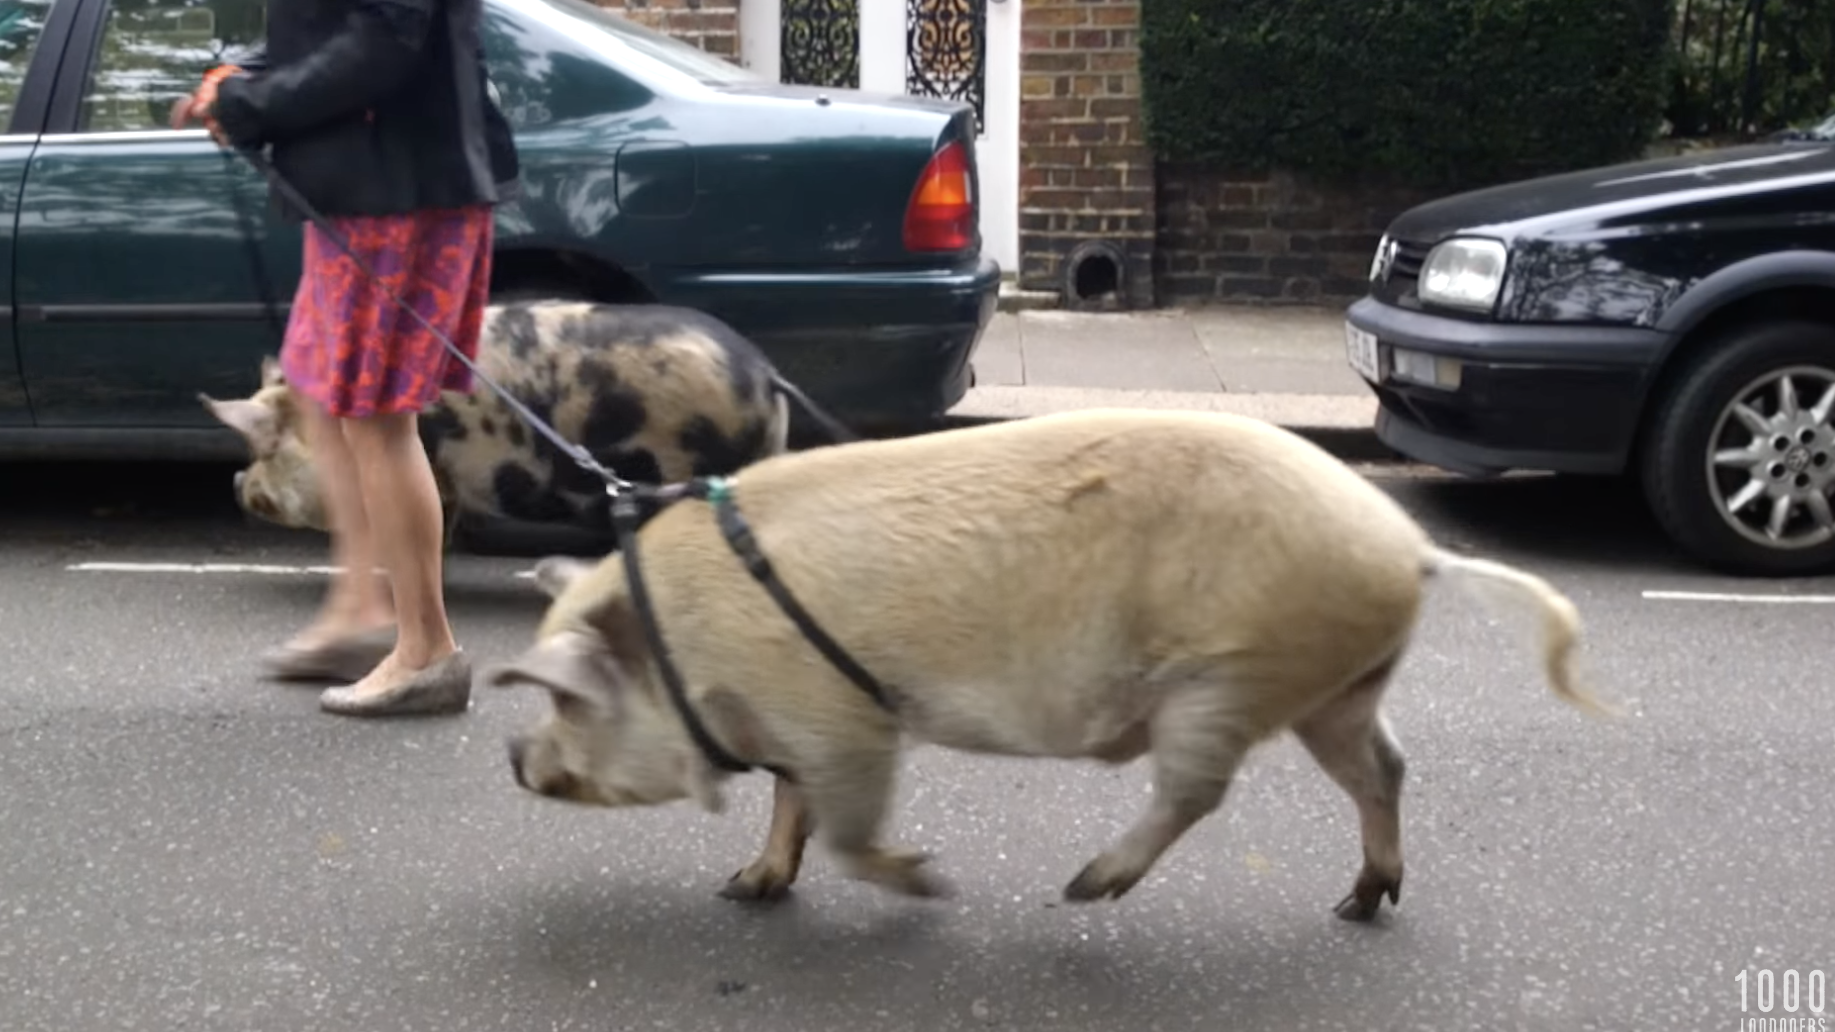 A woman is walking her two pigs down the street